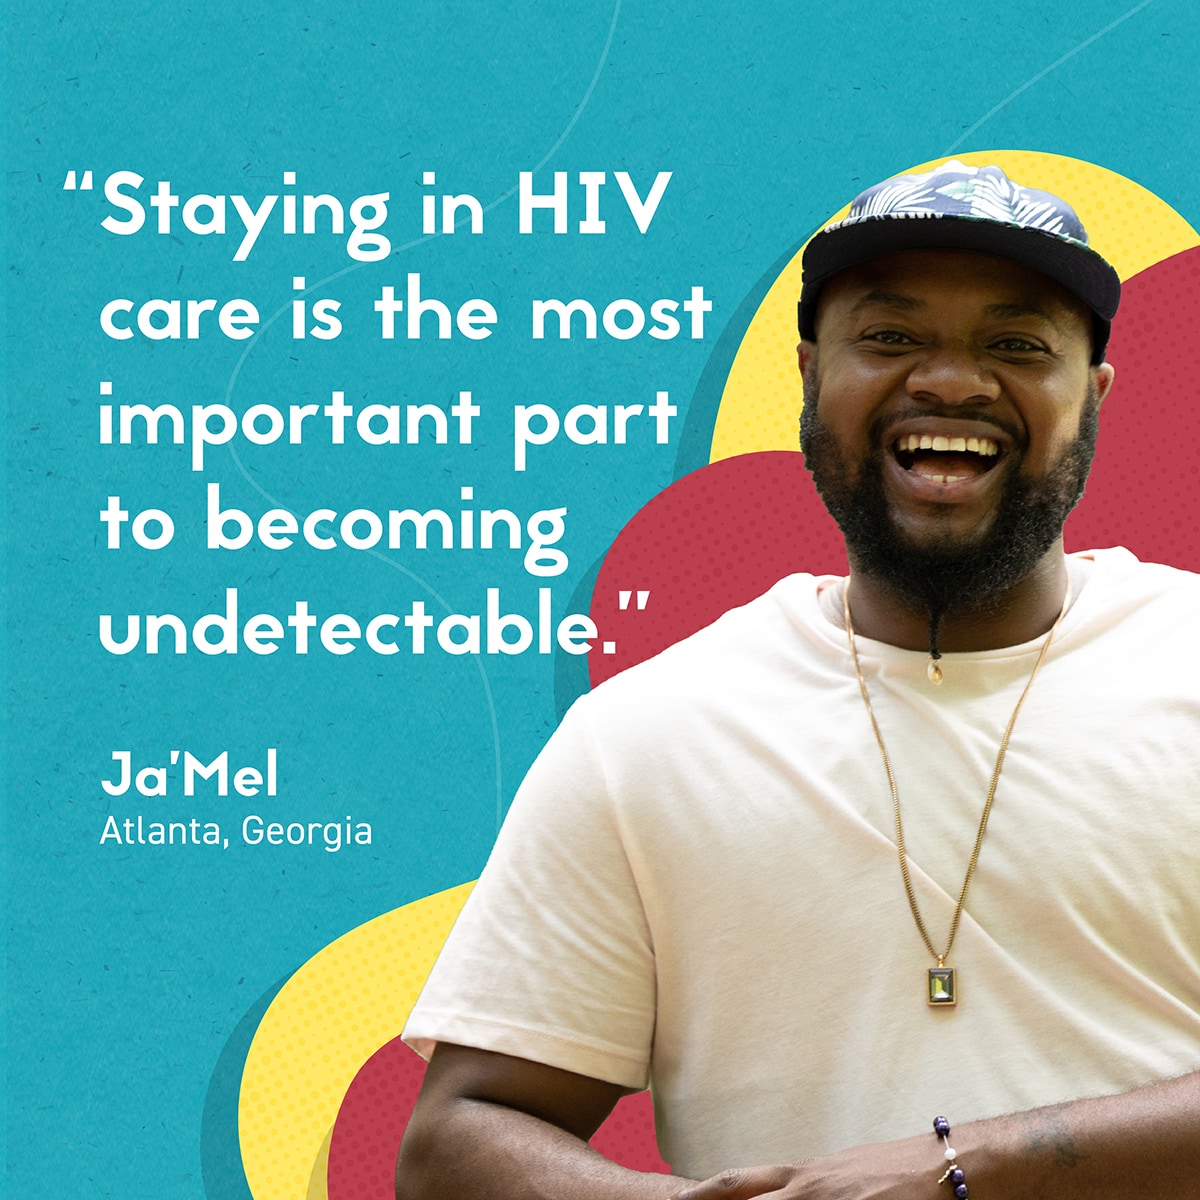 Staying in HIV care is the most important part to becoming undetectable. Ja’Mel, Atlanta, Georgia